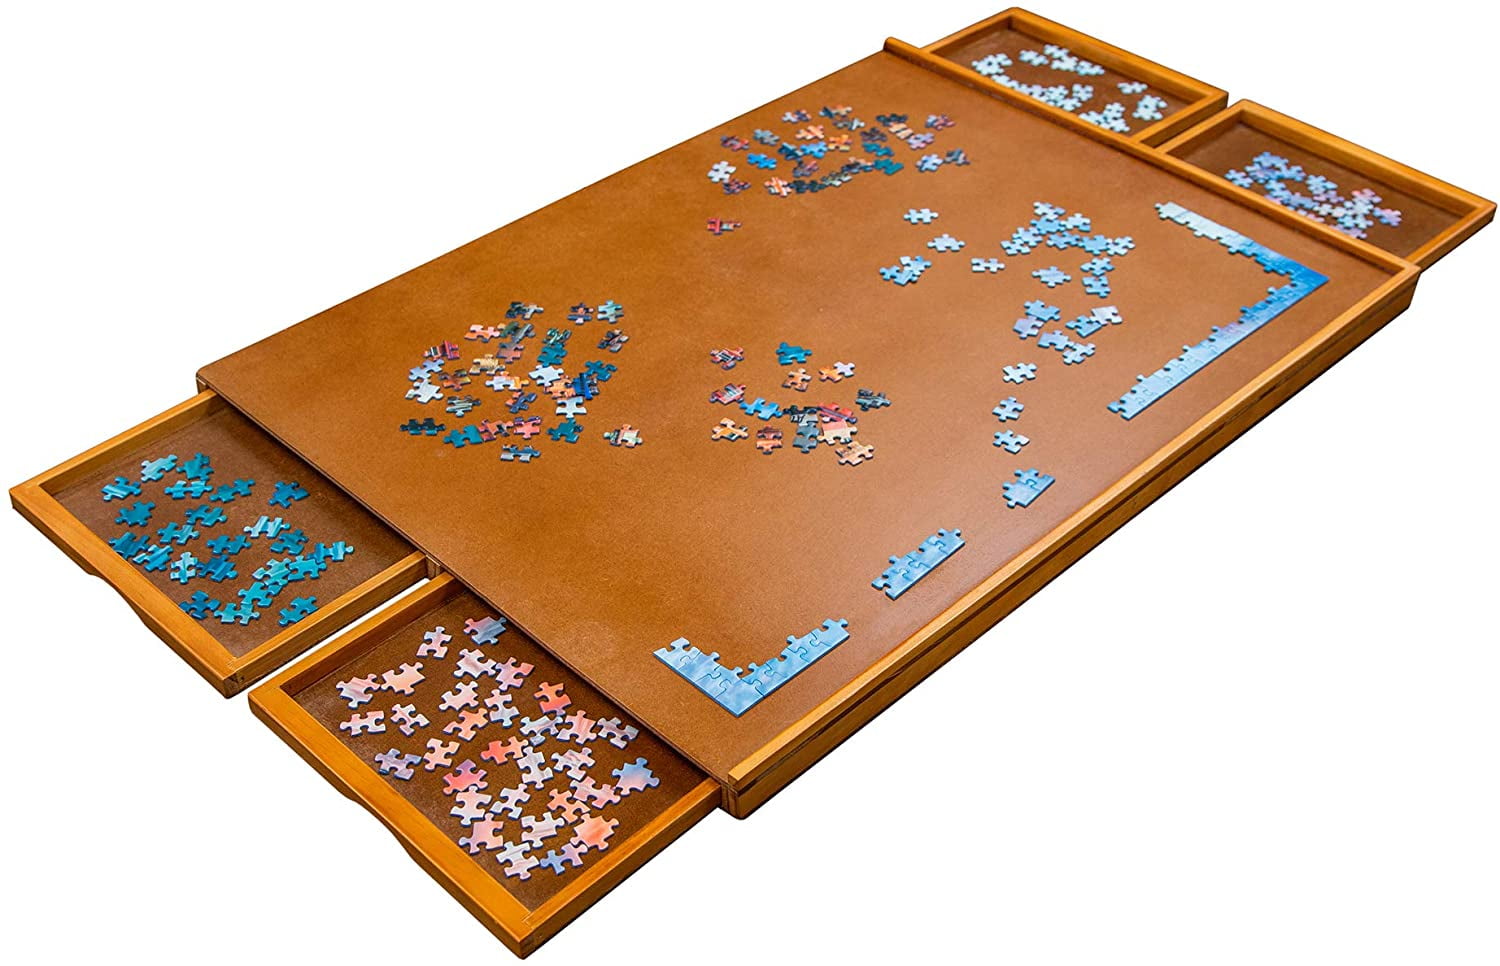 Jumbl 1000-Piece Puzzle Board | 23” x 31” Wooden Jigsaw Puzzle Table